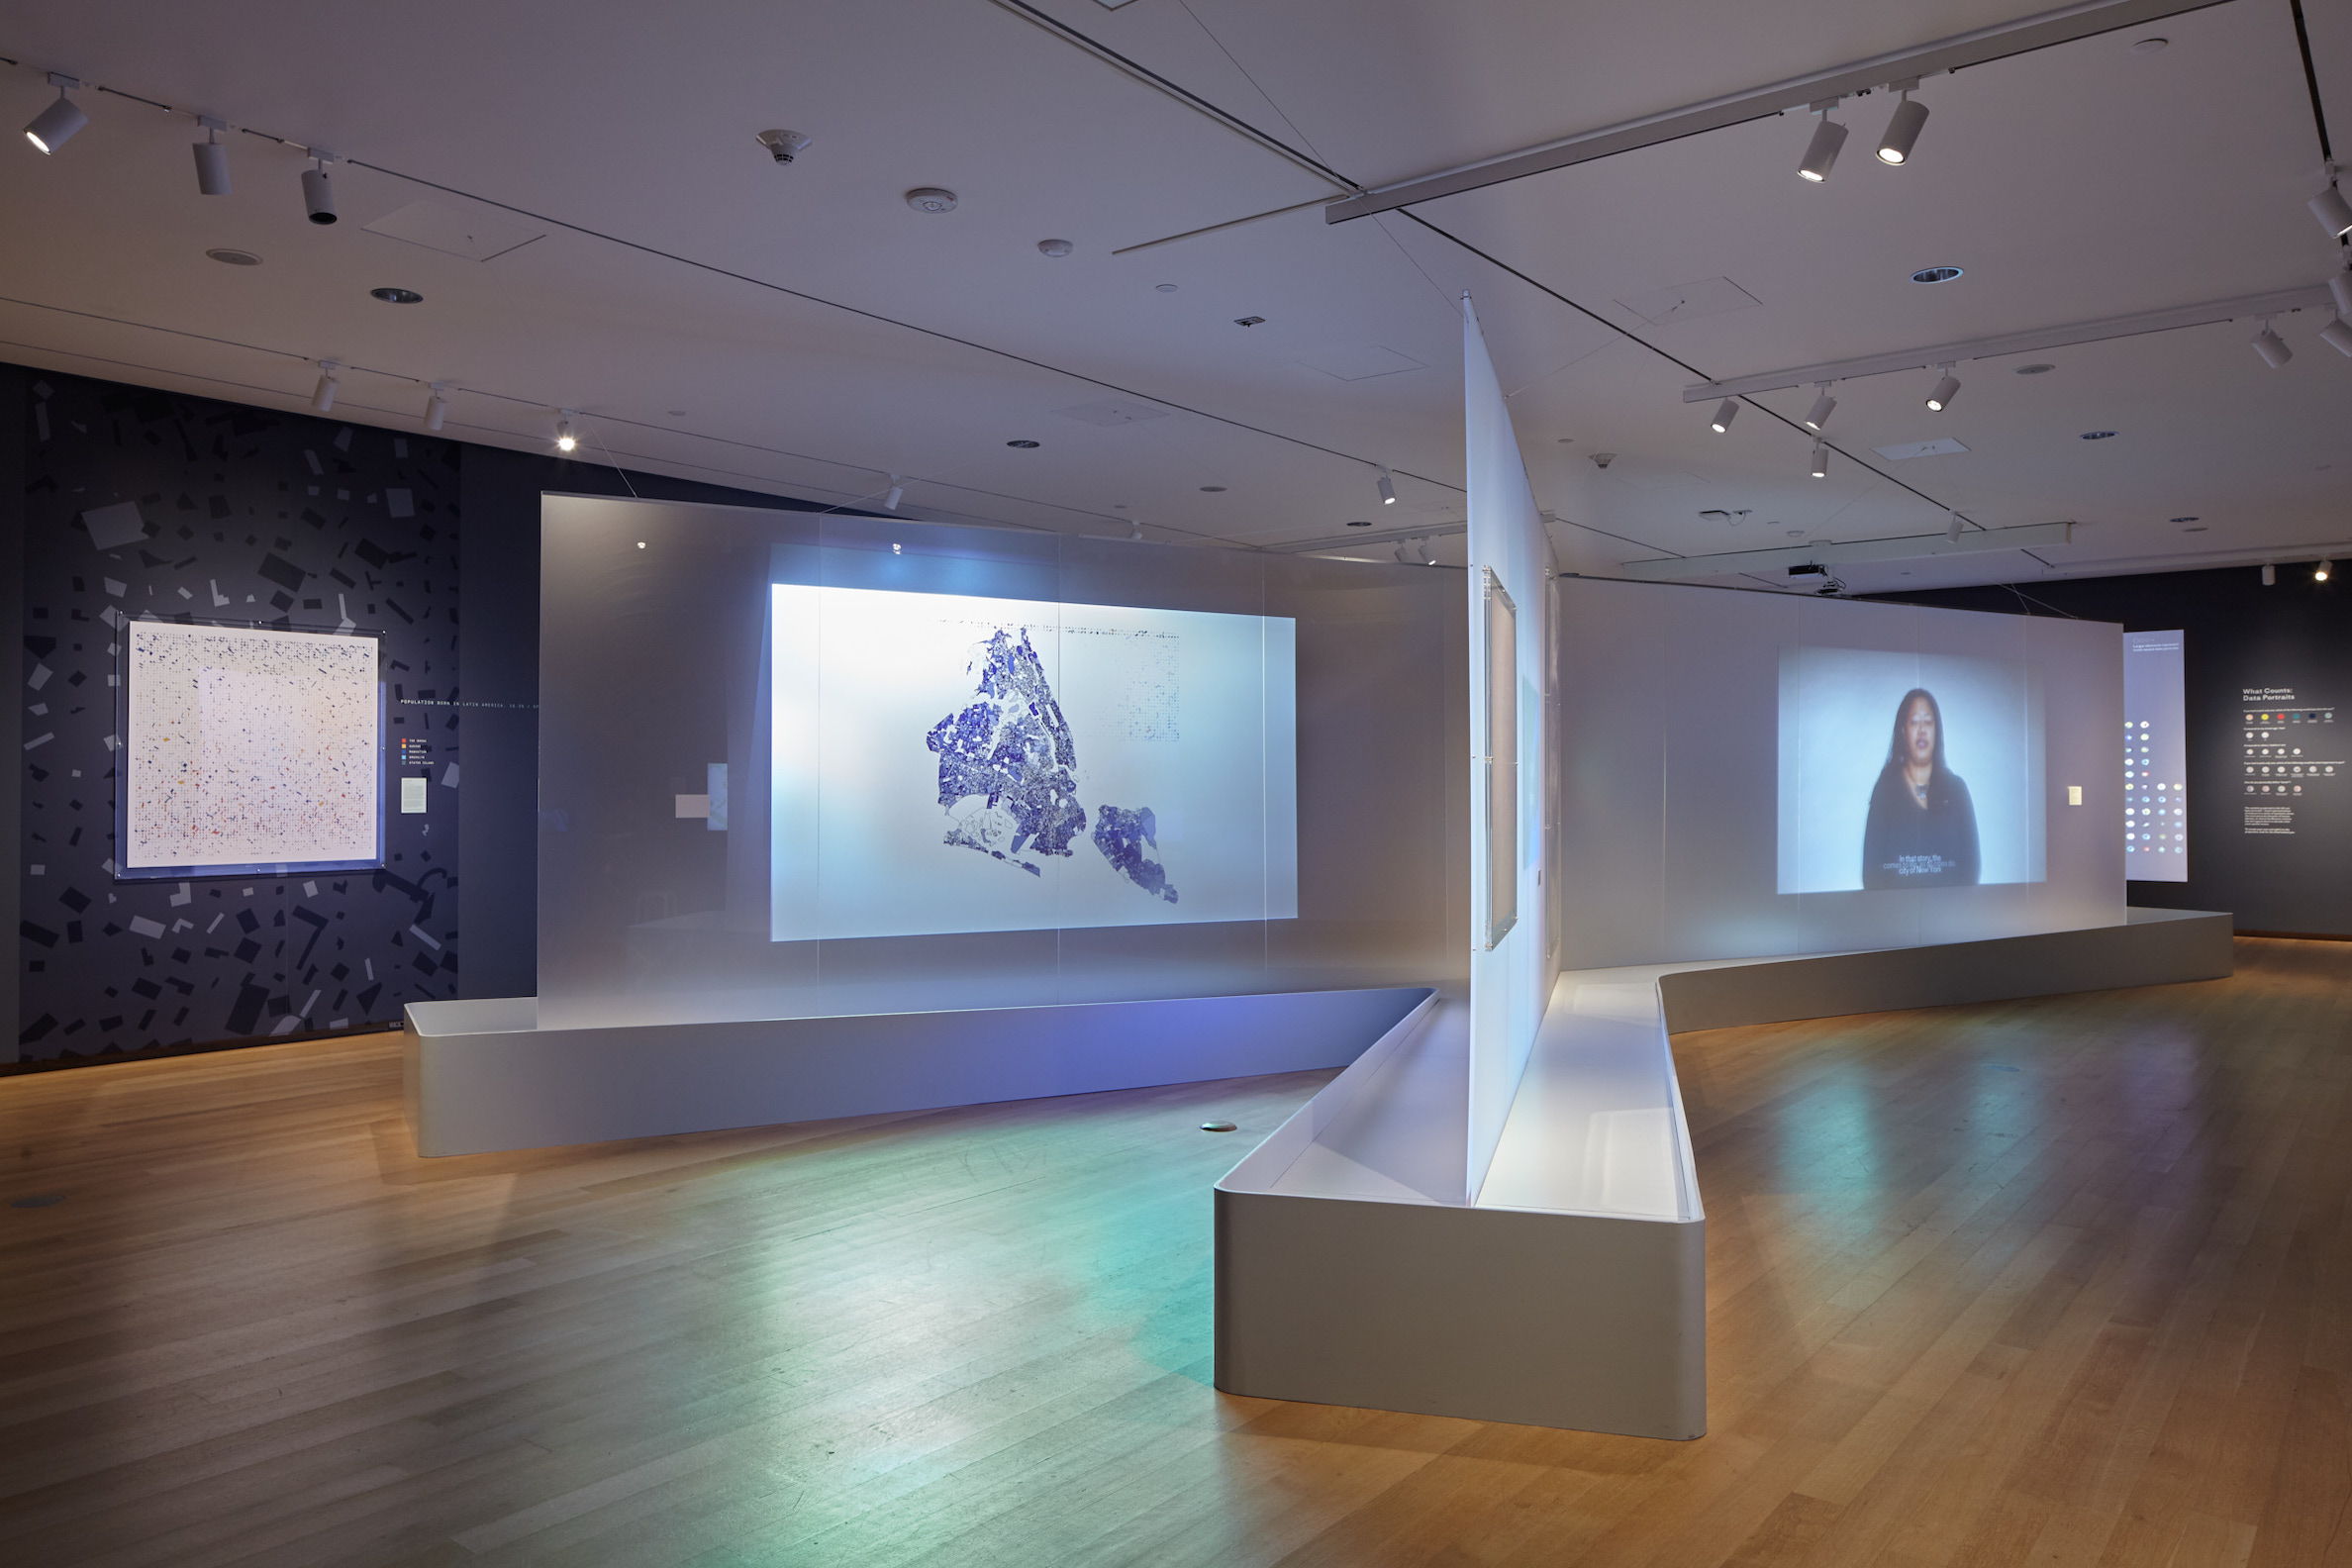 Installation view of Who We Are: Visualizing NYC by the Numbers.